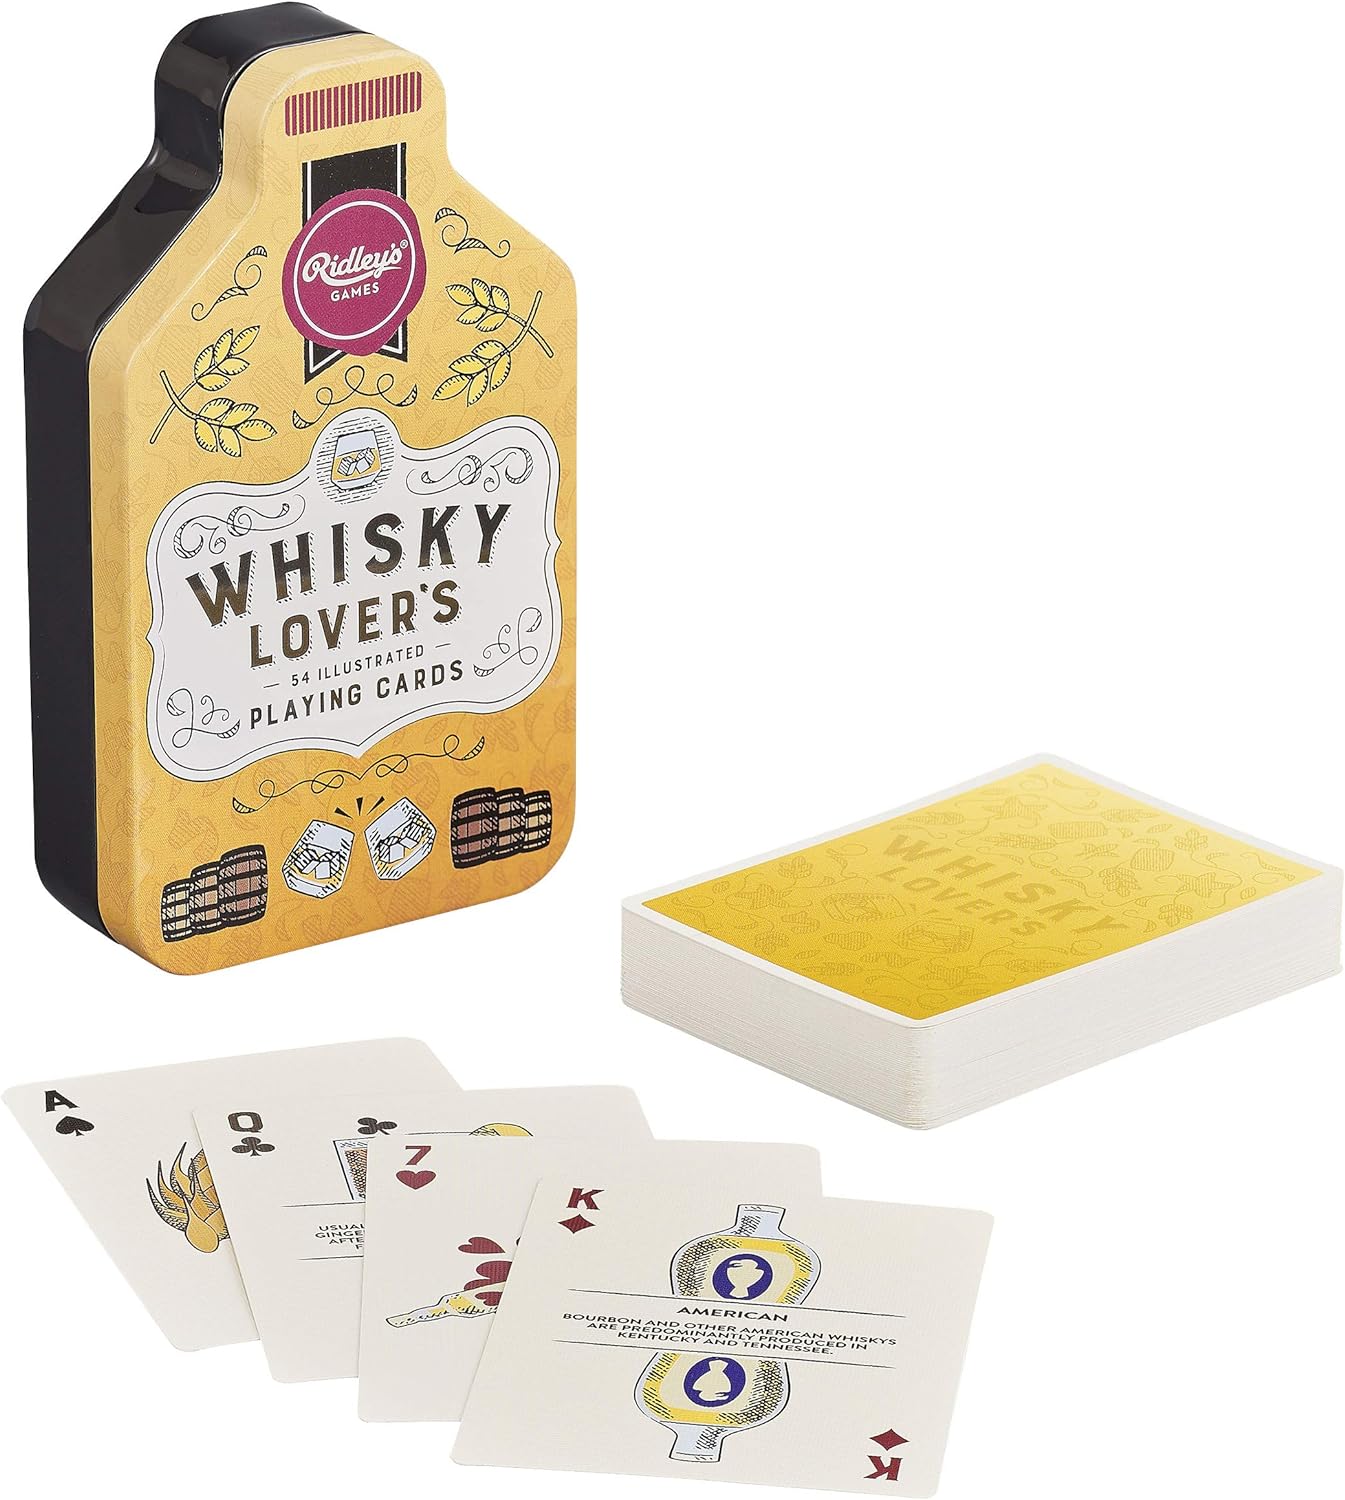 tin and cards for whiskey lovers card game.